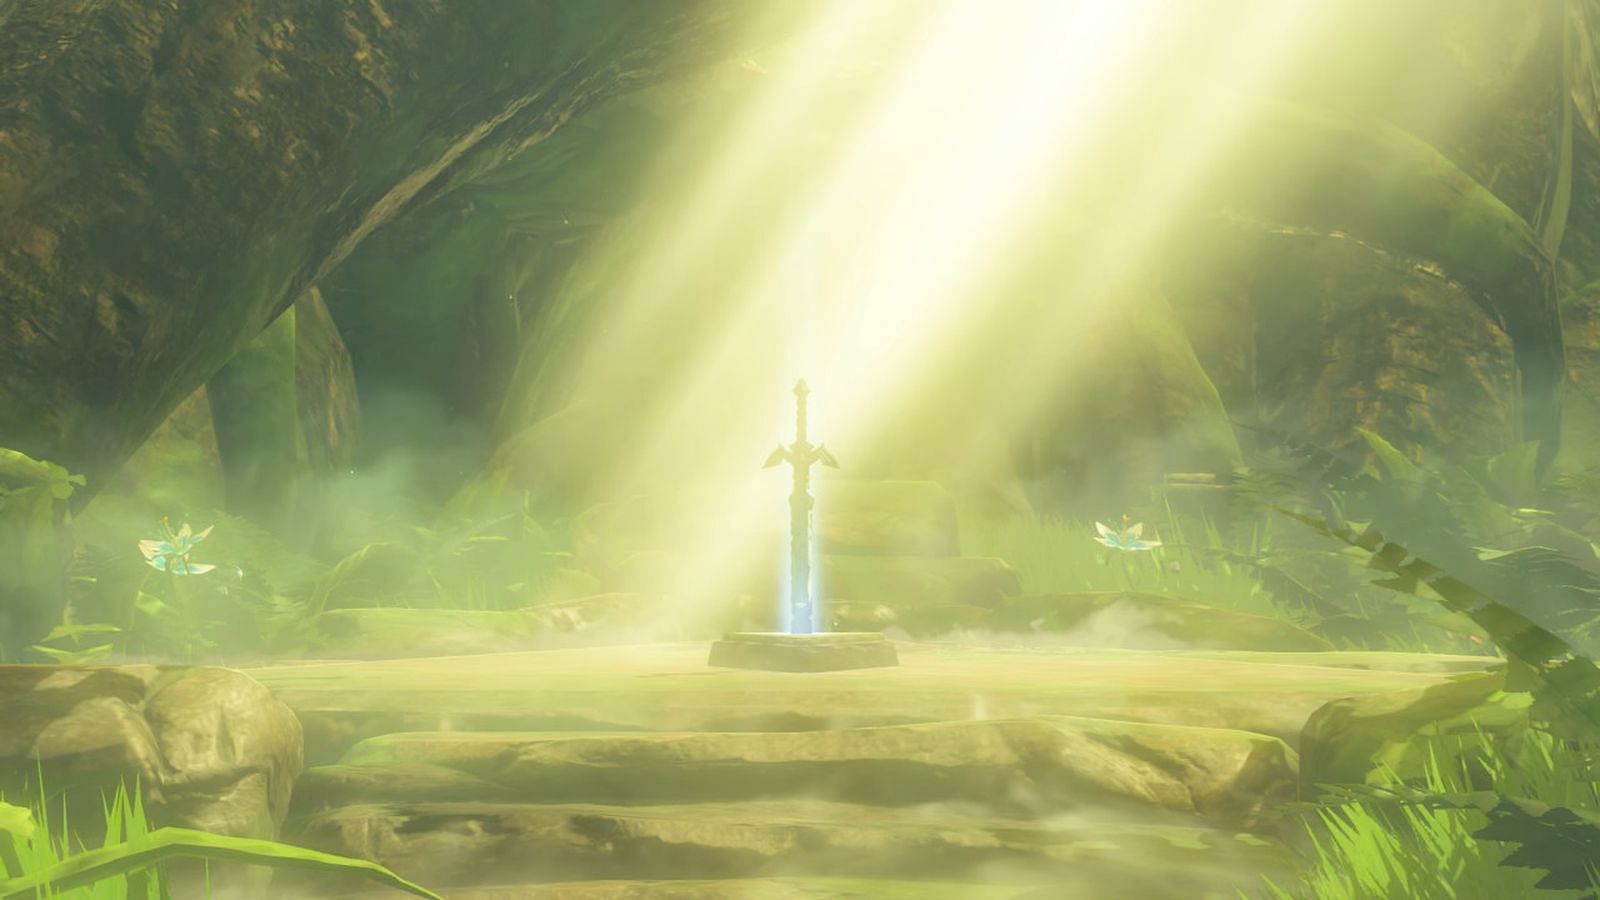 The Master Sword is one of the most iconic weapons in gaming history (Image via Nintendo)